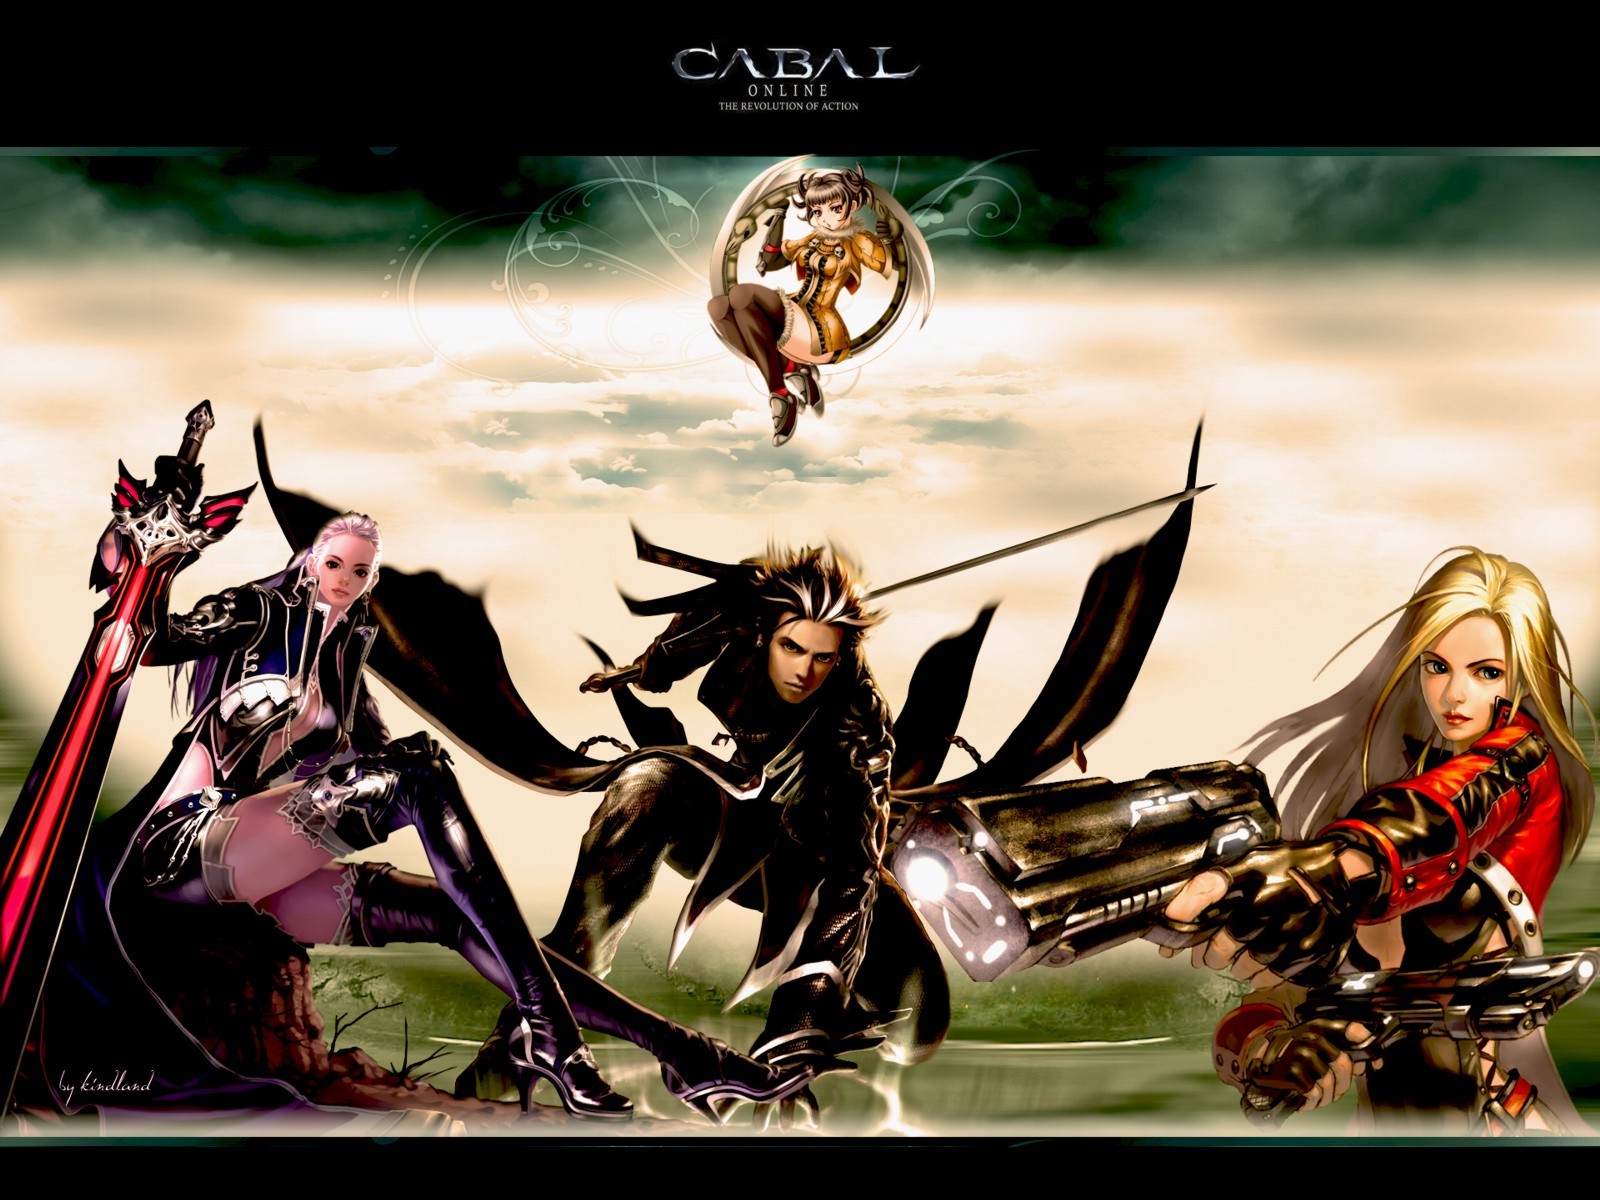 Video Game Cabal Online 1600x1200